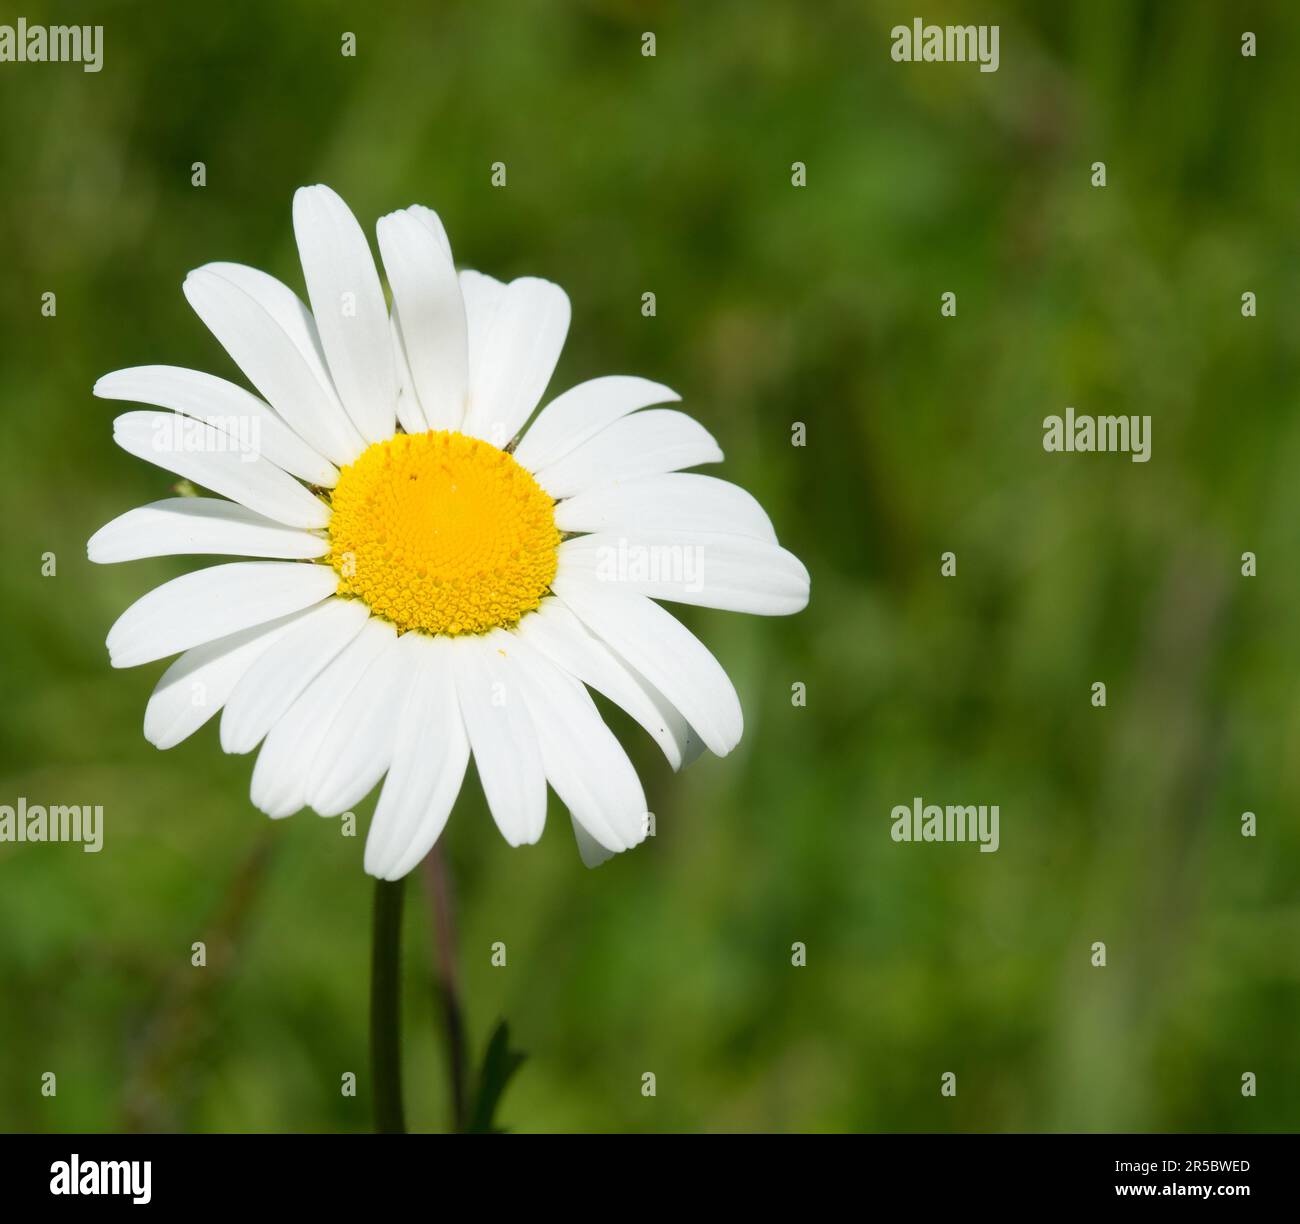 Bellis perennis or Common Daisy ,it is sometimes qualified as common daisy, lawn daisy or English daisy. Stock Photo